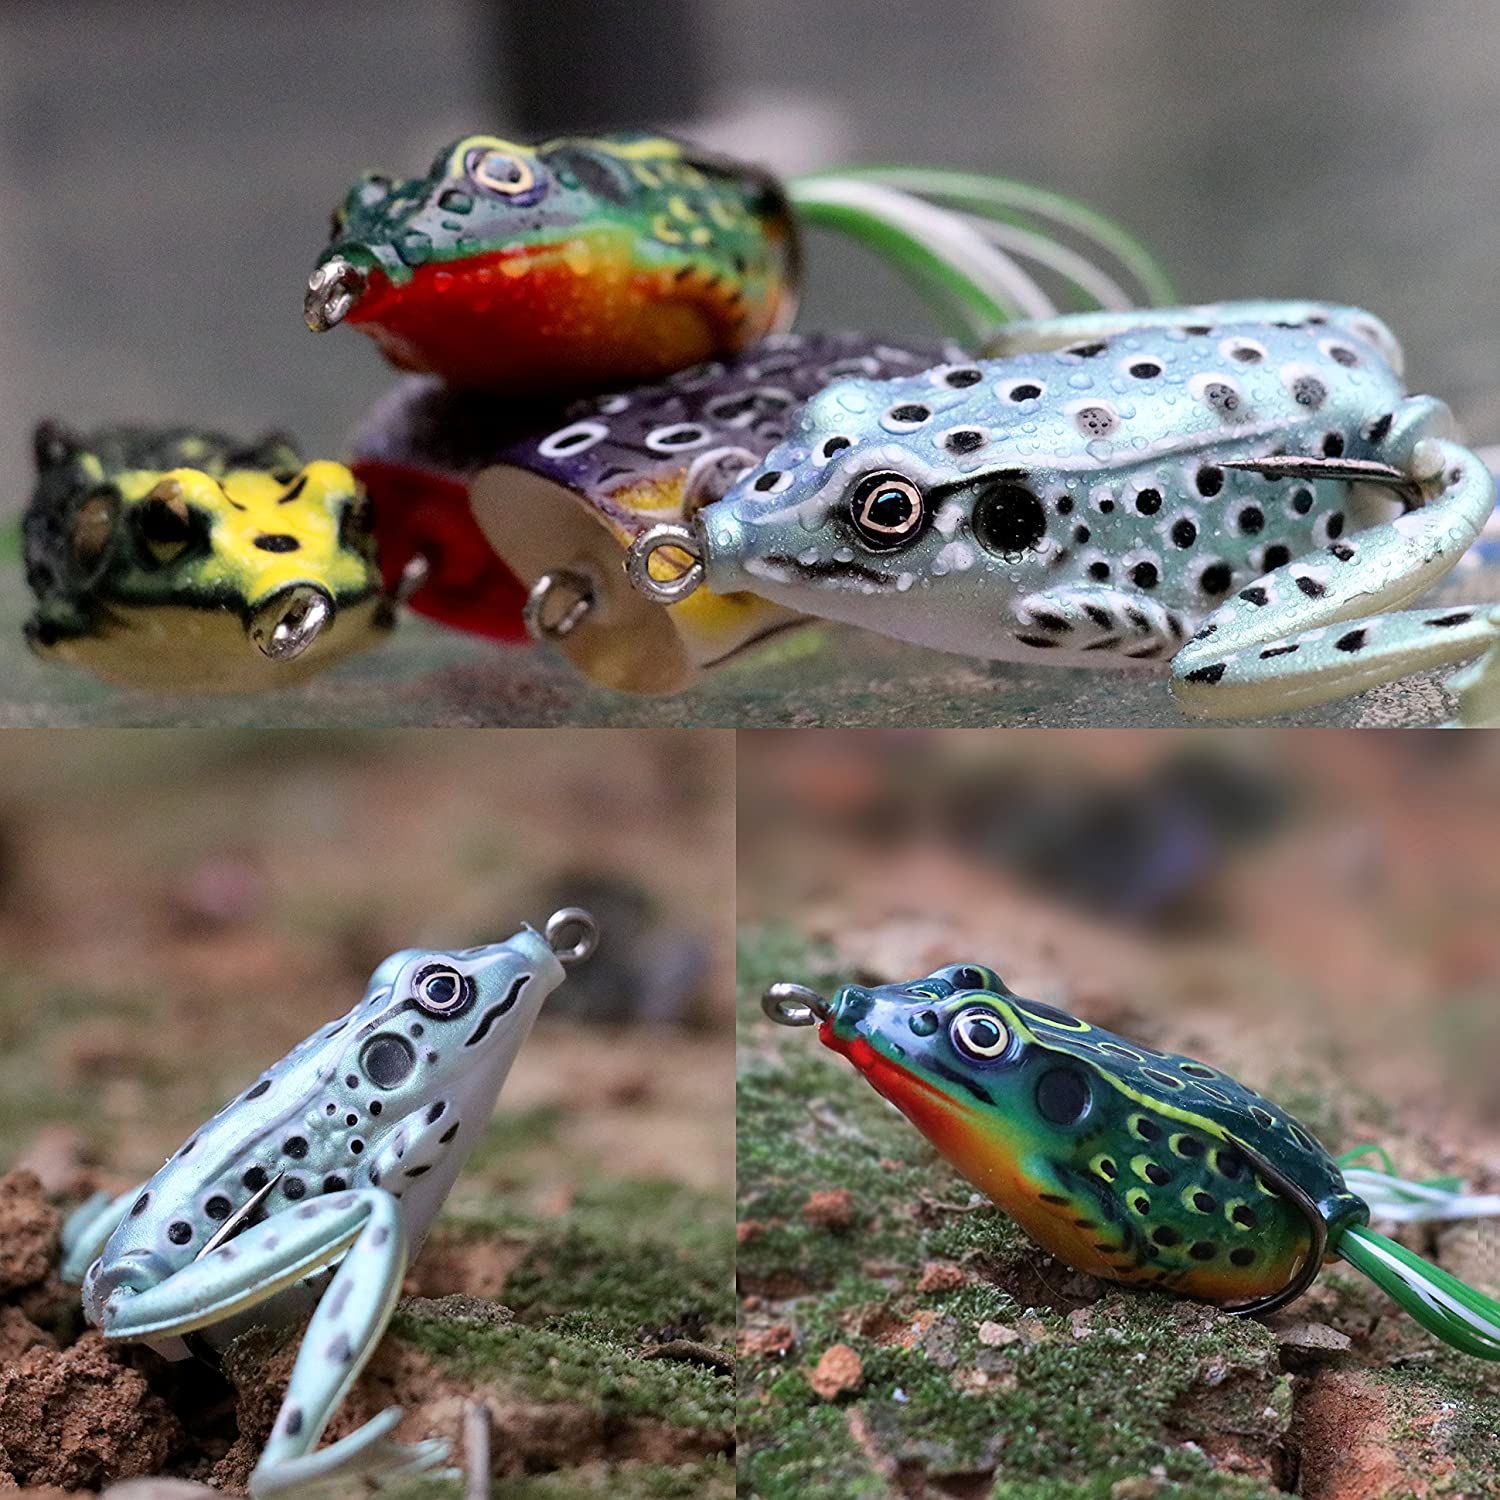 Wholesale 3cm frog lure-Buy Best 3cm frog lure lots from China 3cm frog lure  wholesalers Online